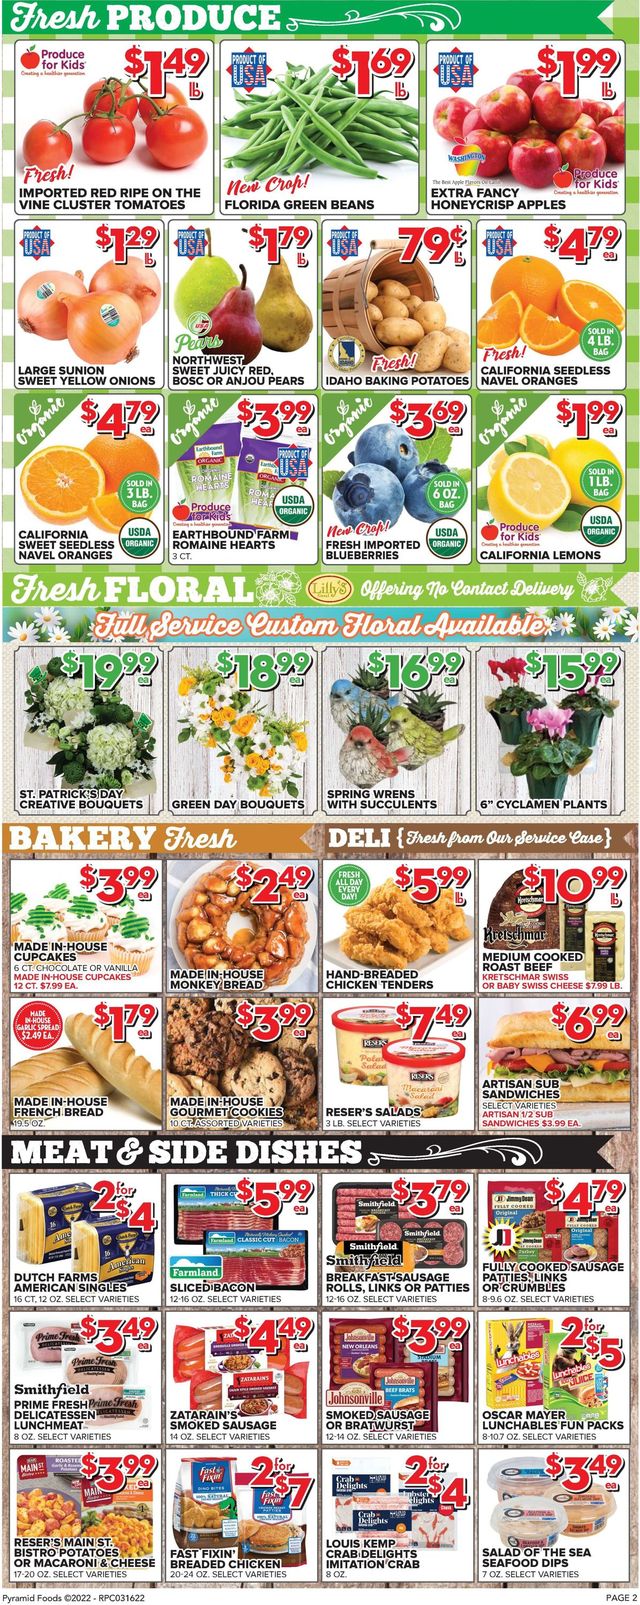 Price Cutter Ad from 03/16/2022